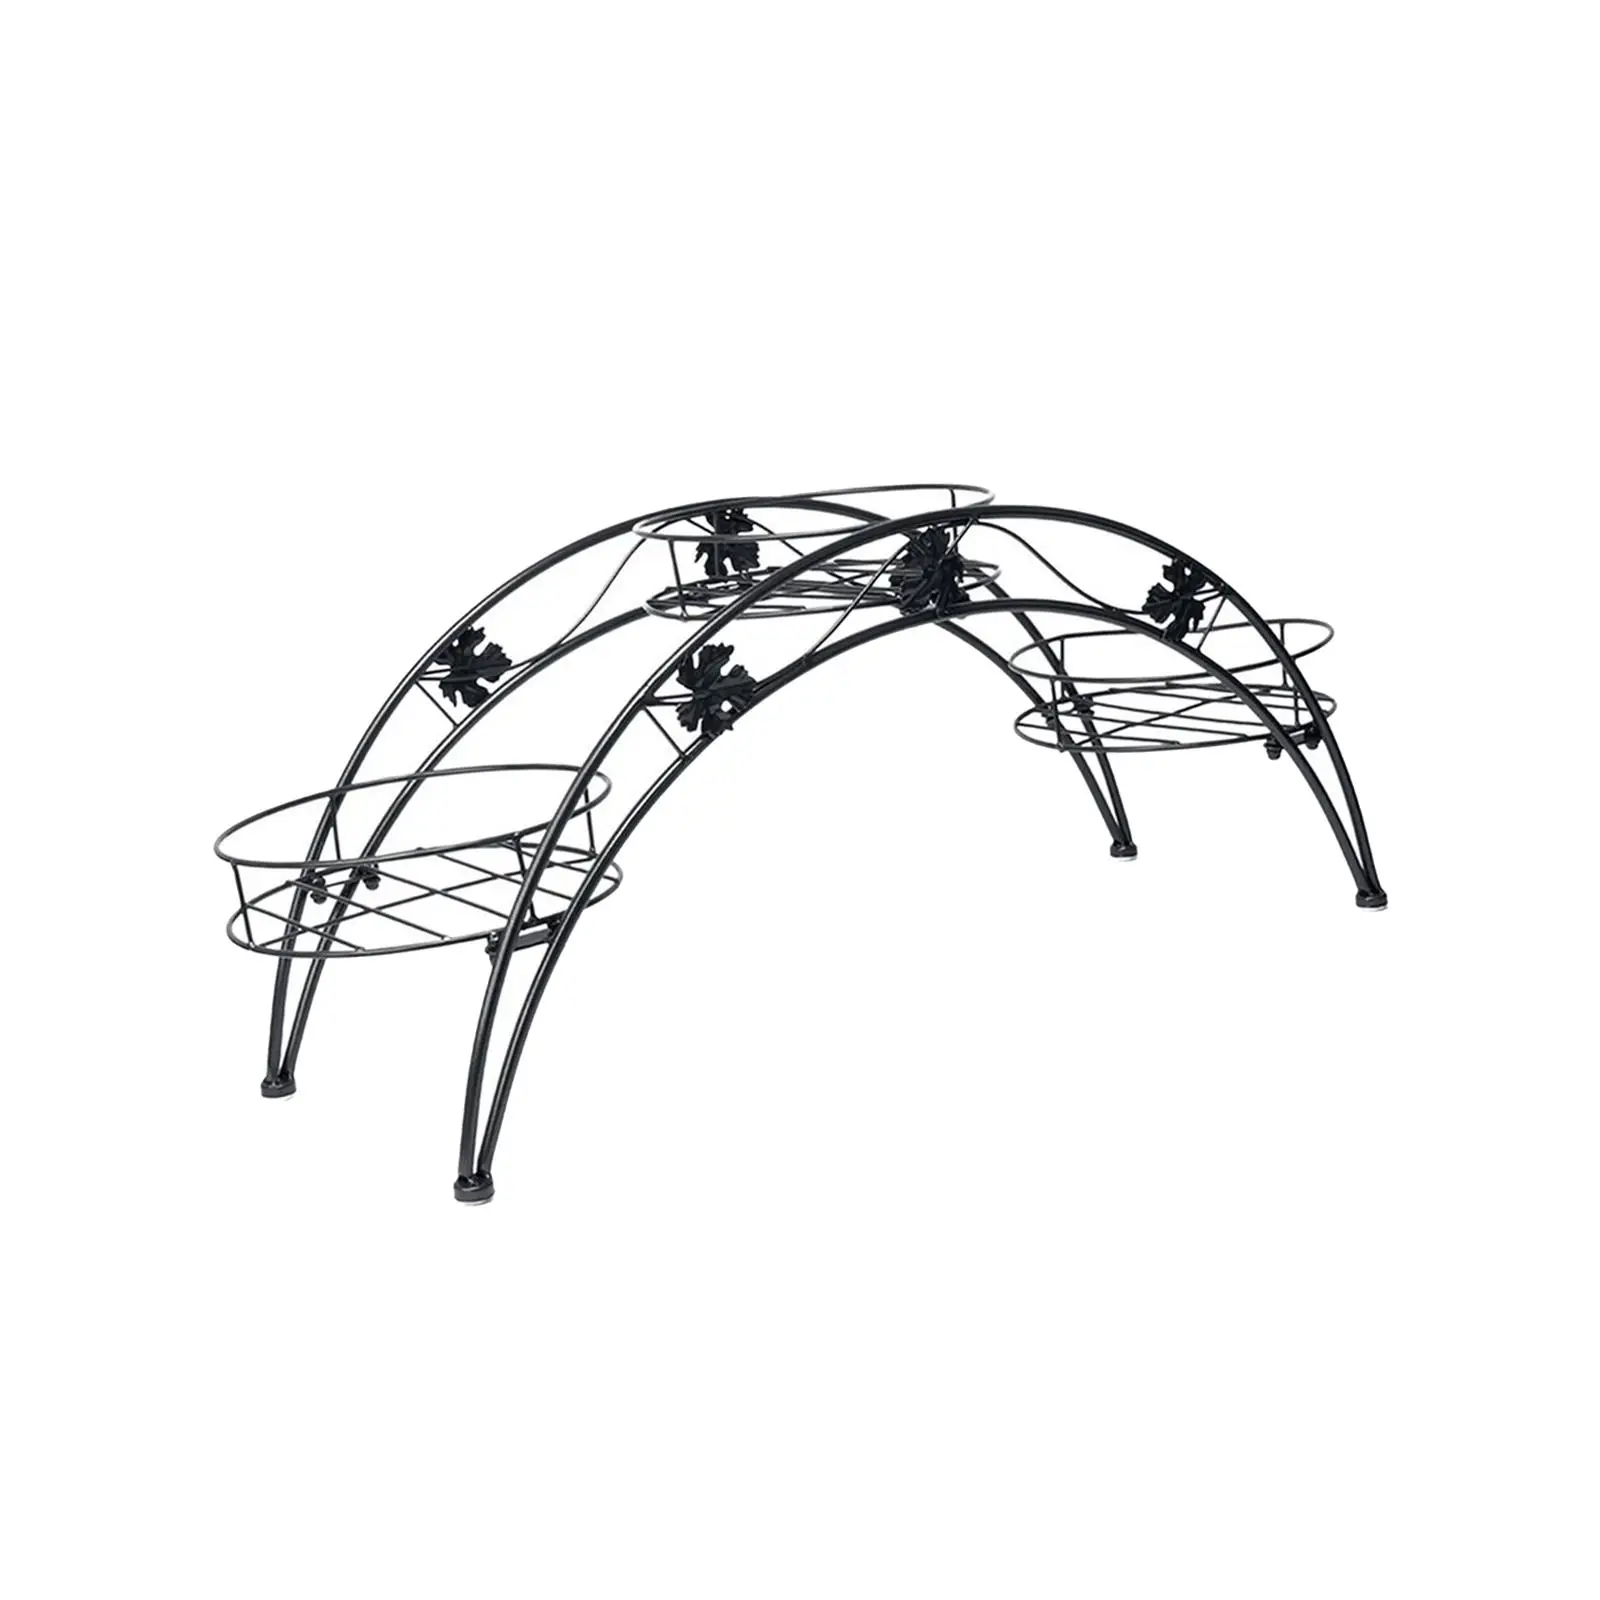 Potted Holder Arch Shaped Iron Art Flower Pot Stand Shelf Rustproof Iron Art Flower Pot Holder Flower Pot Stand with 3 Pot Trays